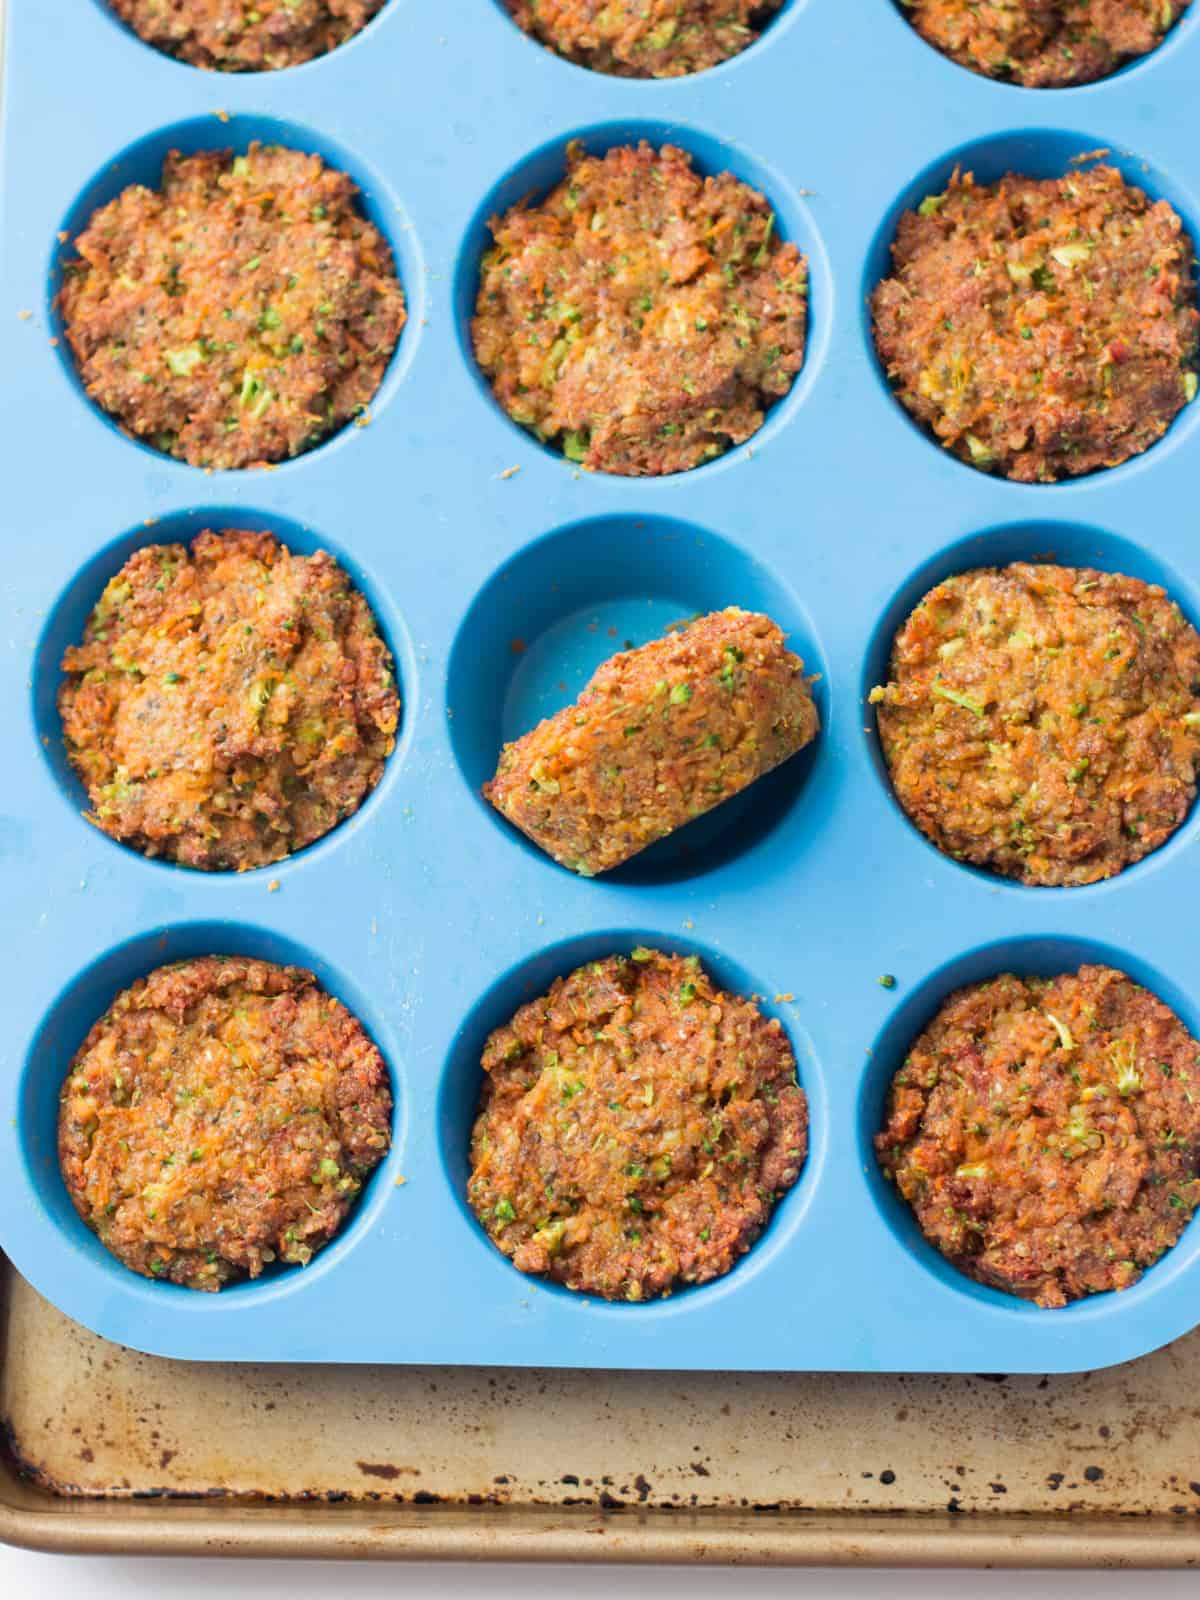 cooked vegetable muffins in blue silicone muffin pan